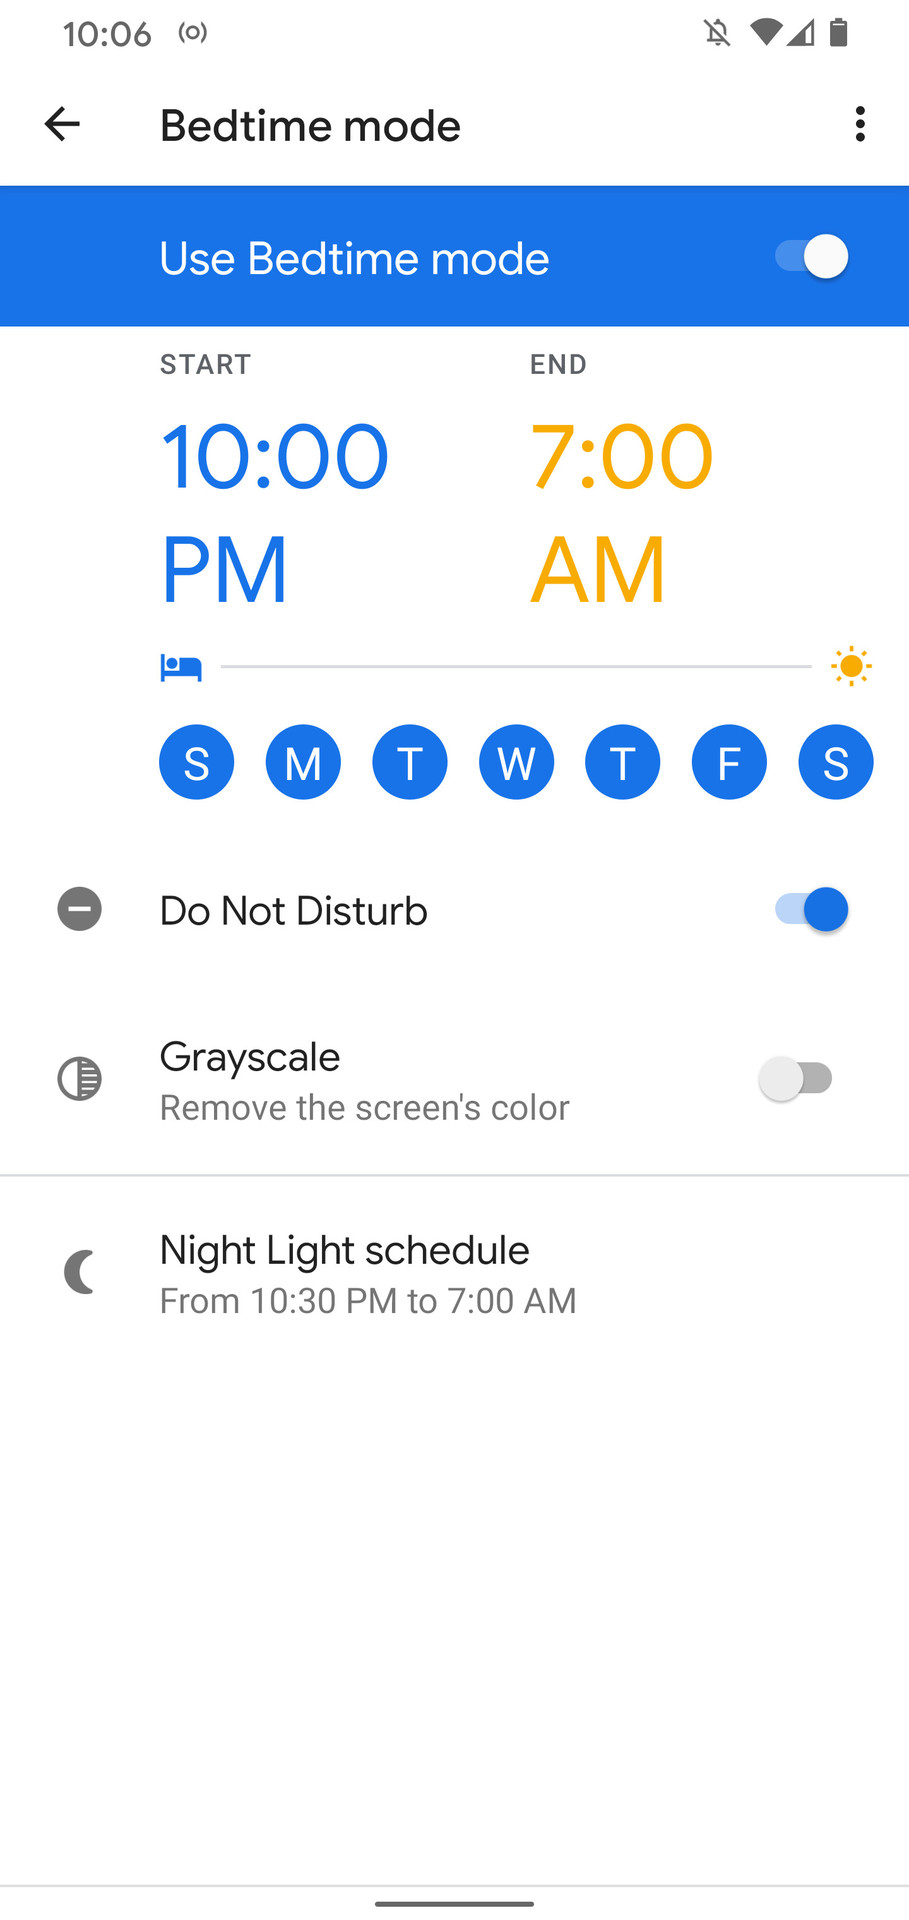 Digital Wellbeing refresh bed time mode 2